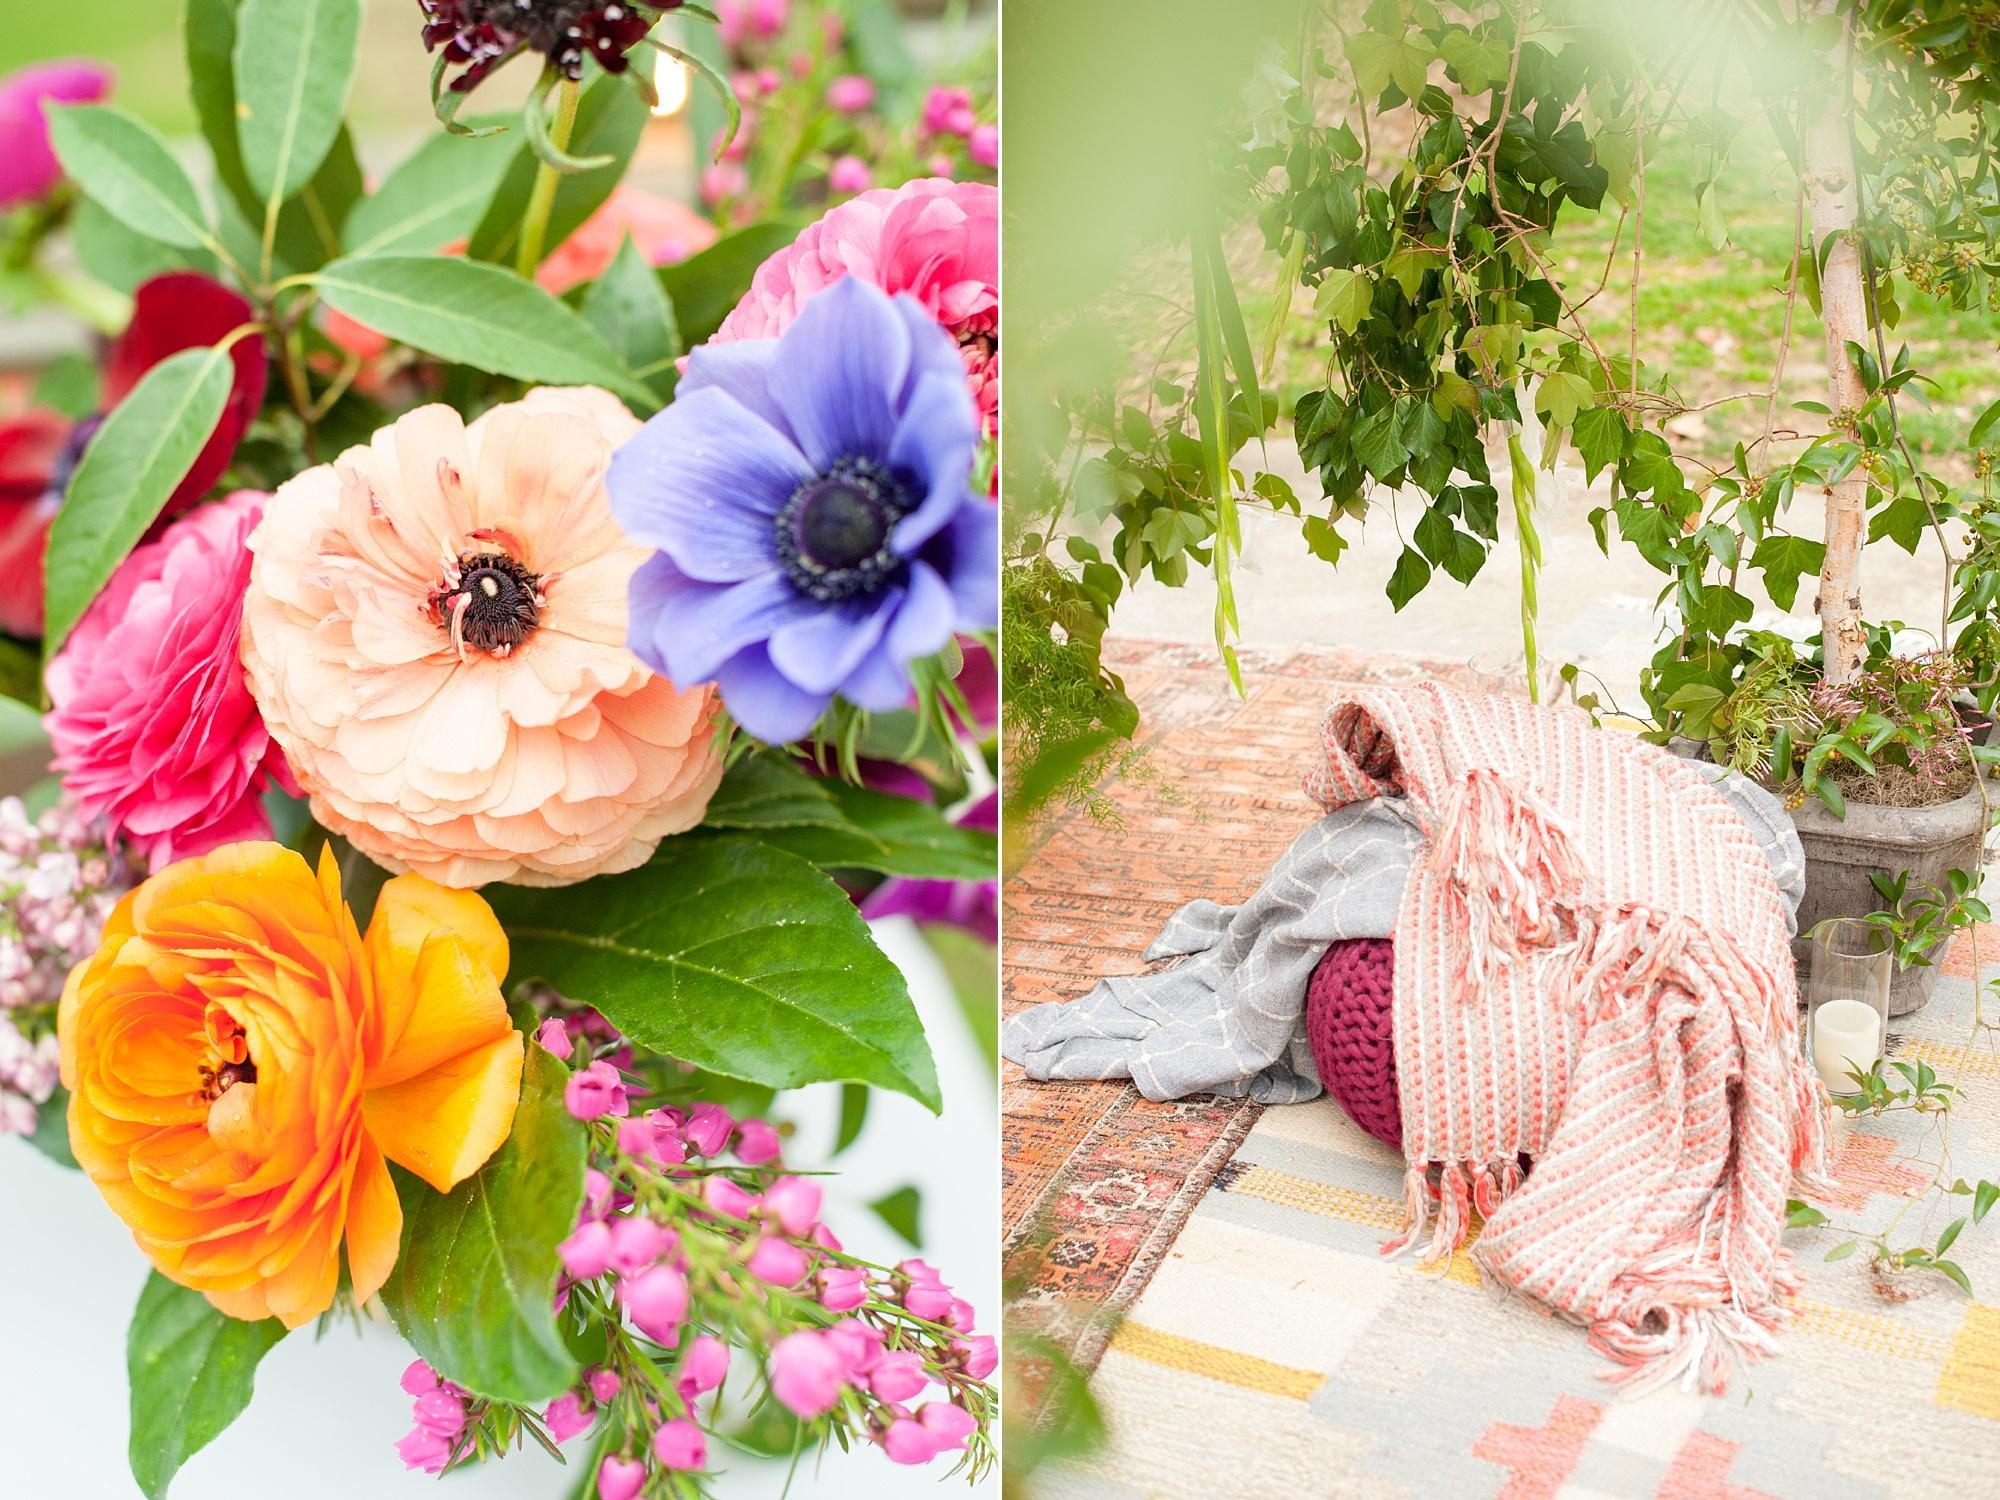 Enchanted garden birthday photos with blankets and anemone flowers. Images by Mikkel Paige Photography, Raleigh wedding photographer, flowers by Meristem Floral.